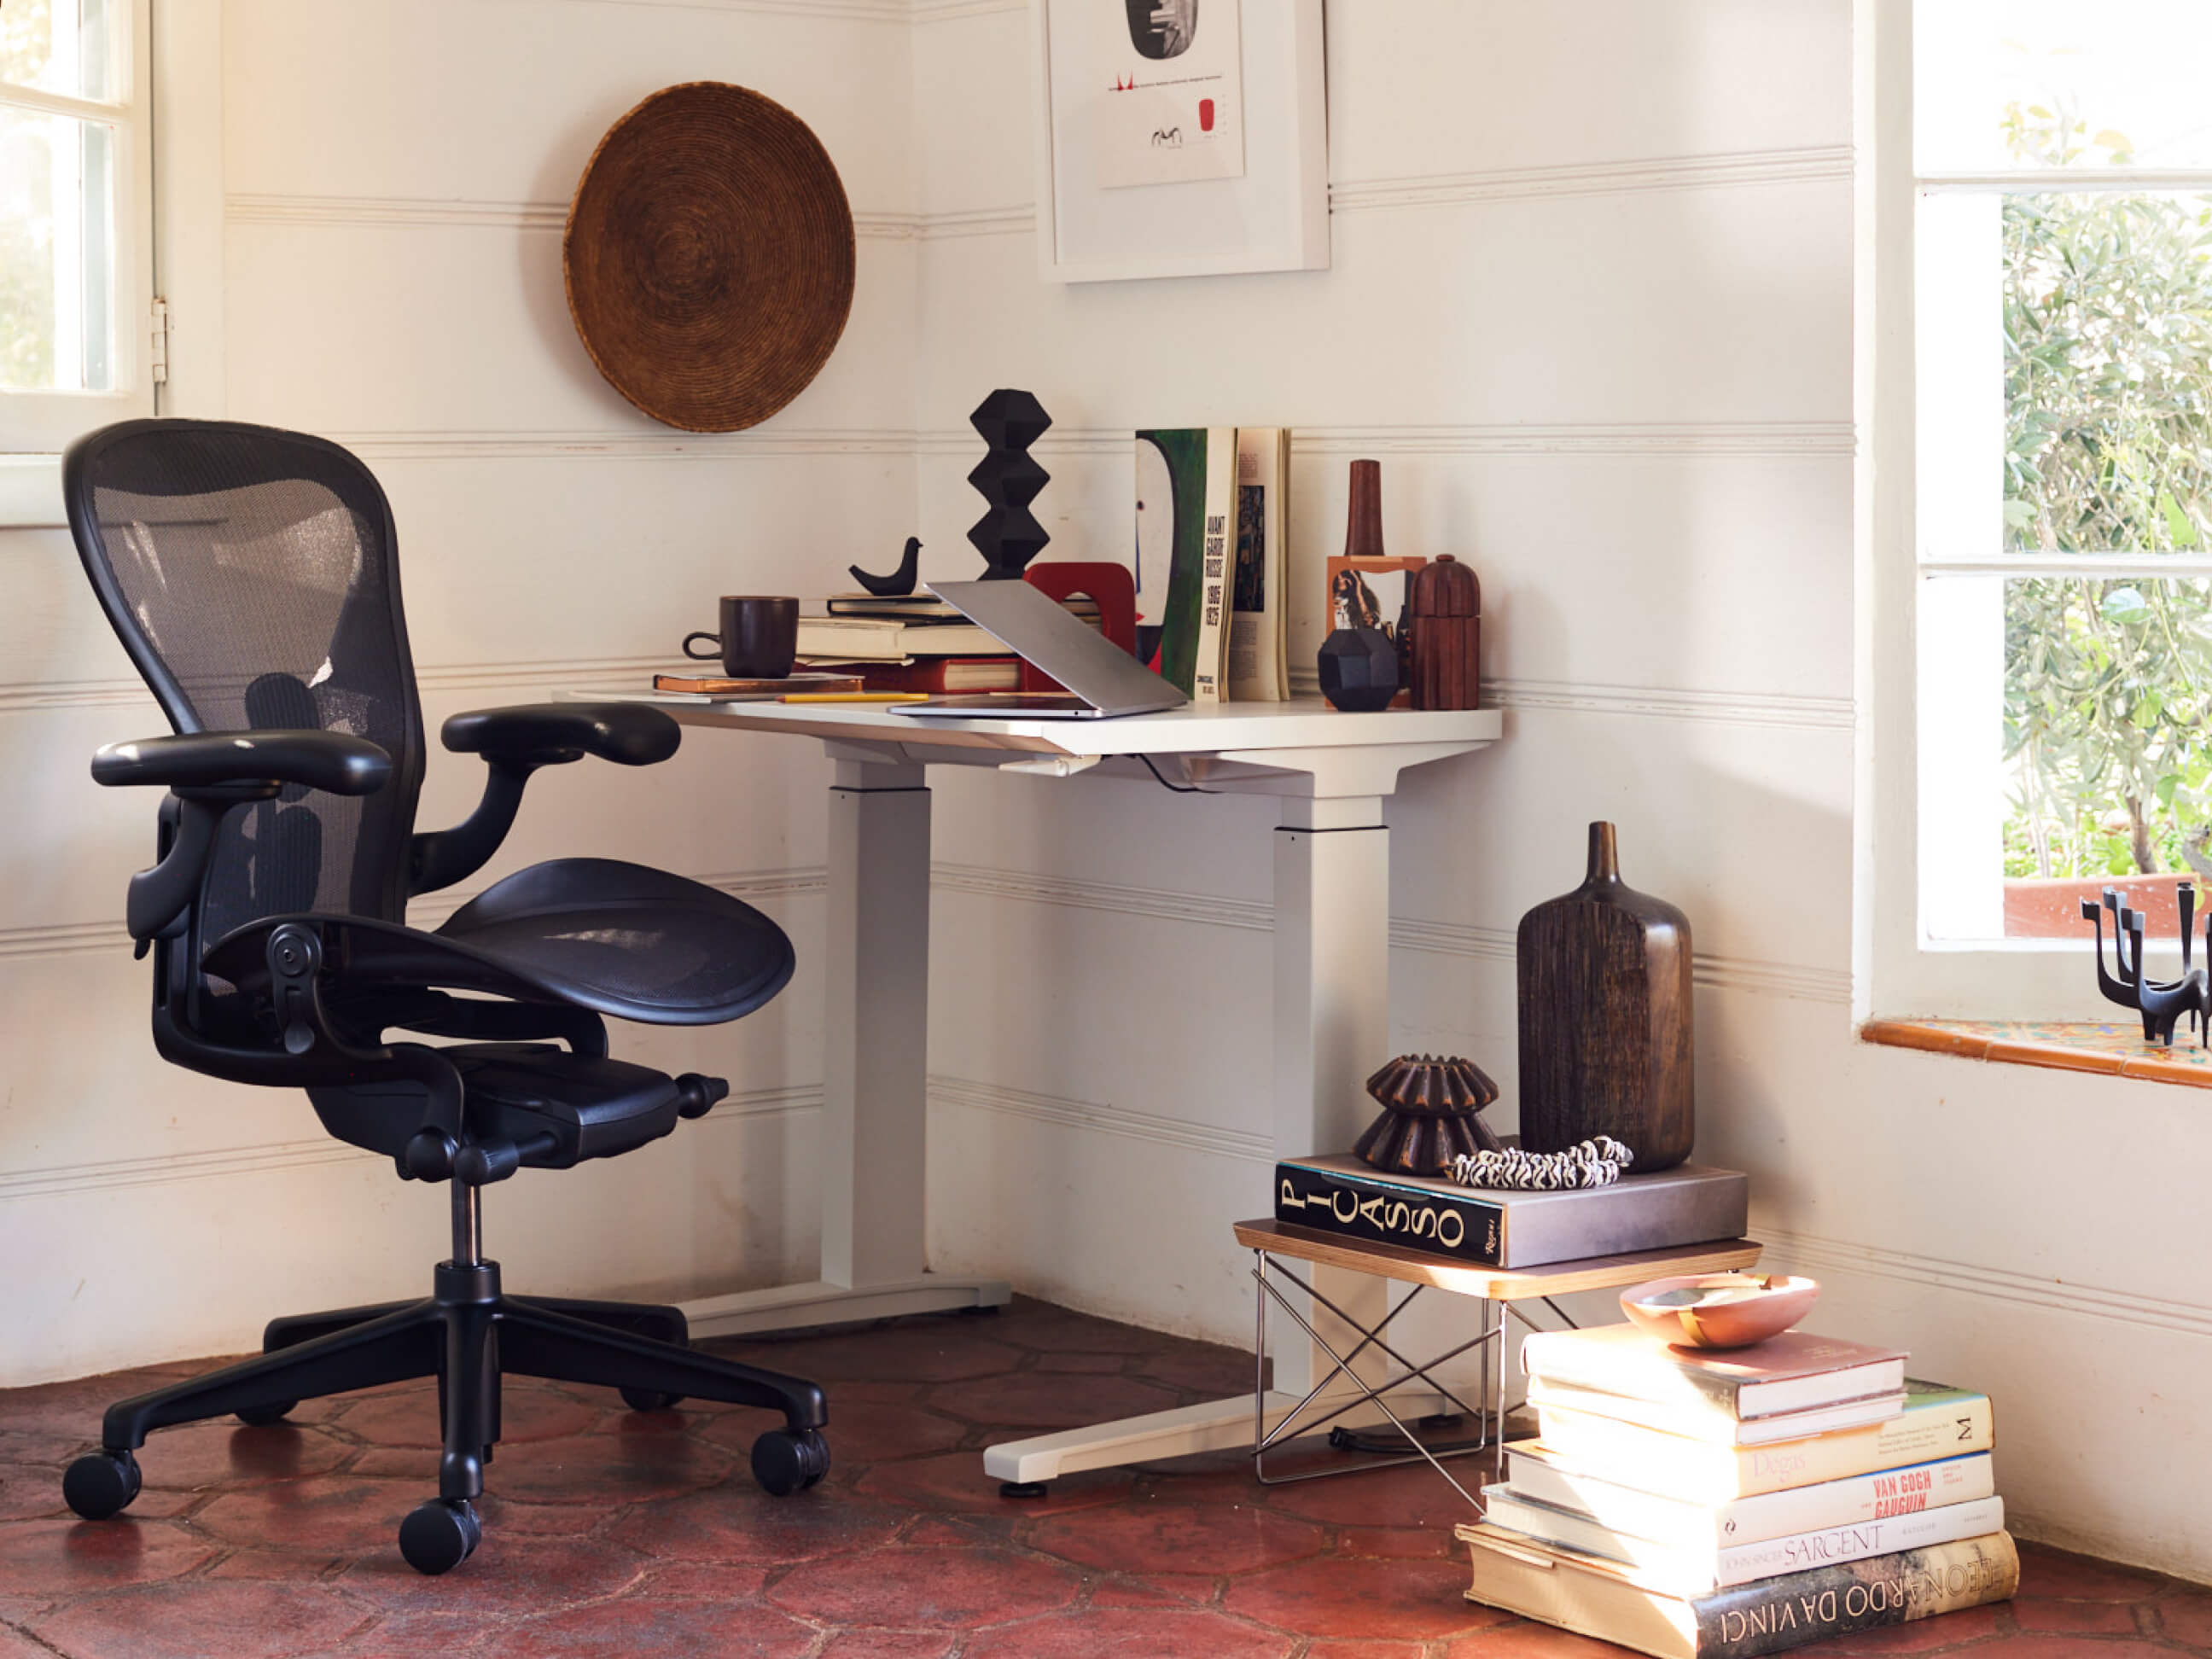 An ergonomic and personalized home office in a brightly lit corner, decorated with vases and books.